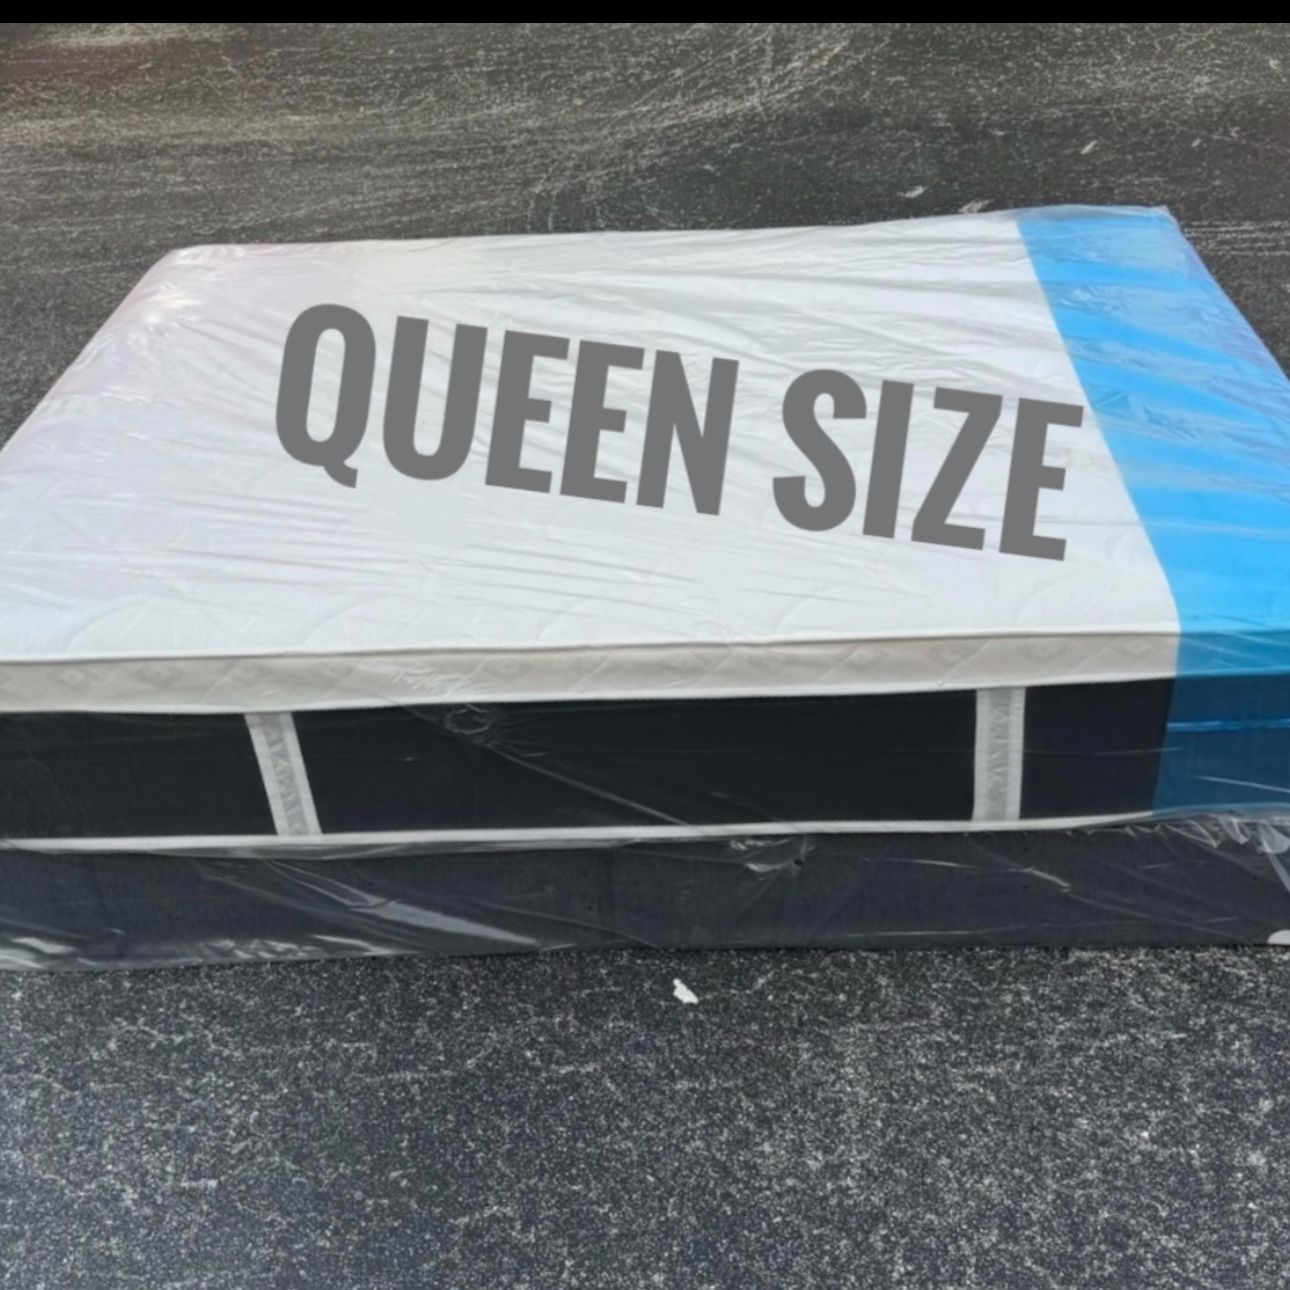 NEW Mattress Queen Size Plush Pillowtop With Box Spring // Offer  🚚